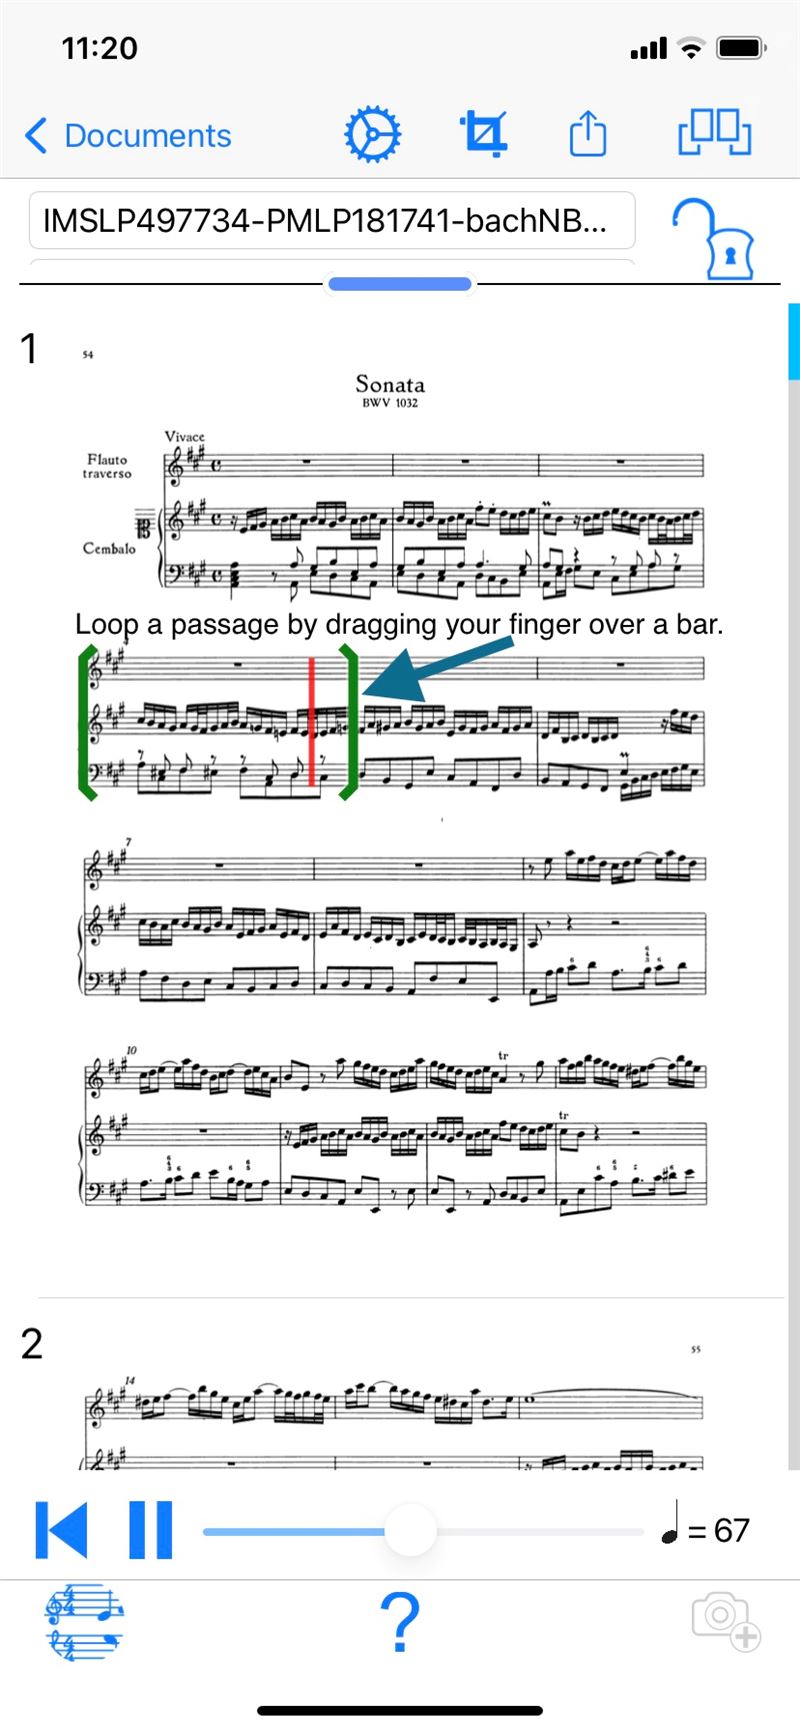 PlayScore 2 sheet music scanning app - exports MIDI and MusicXML